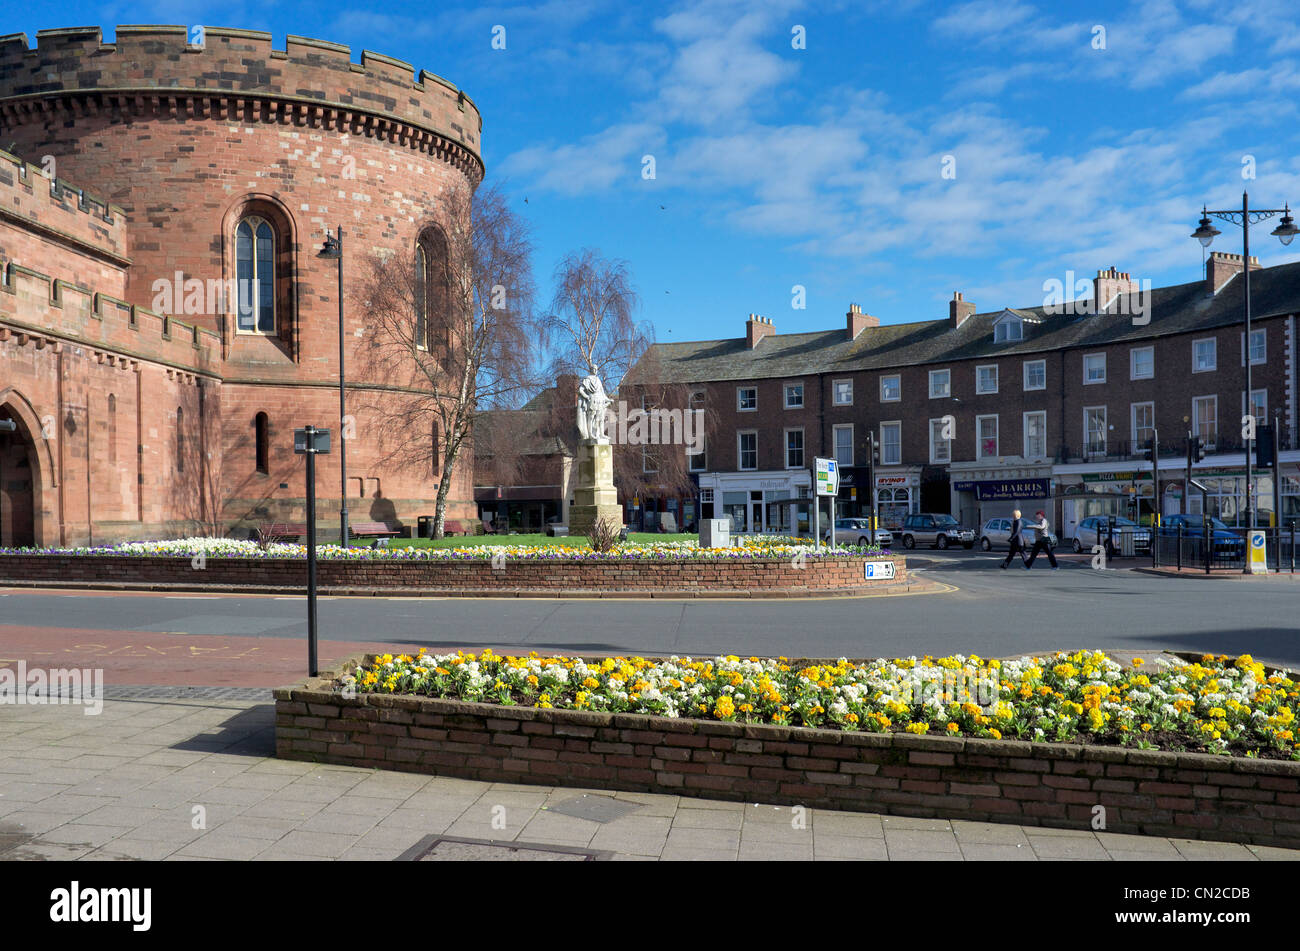 Carlisle City center looking towards the crescent with the Citadel on the left, Cumbria, United Kingdom Stock Photo